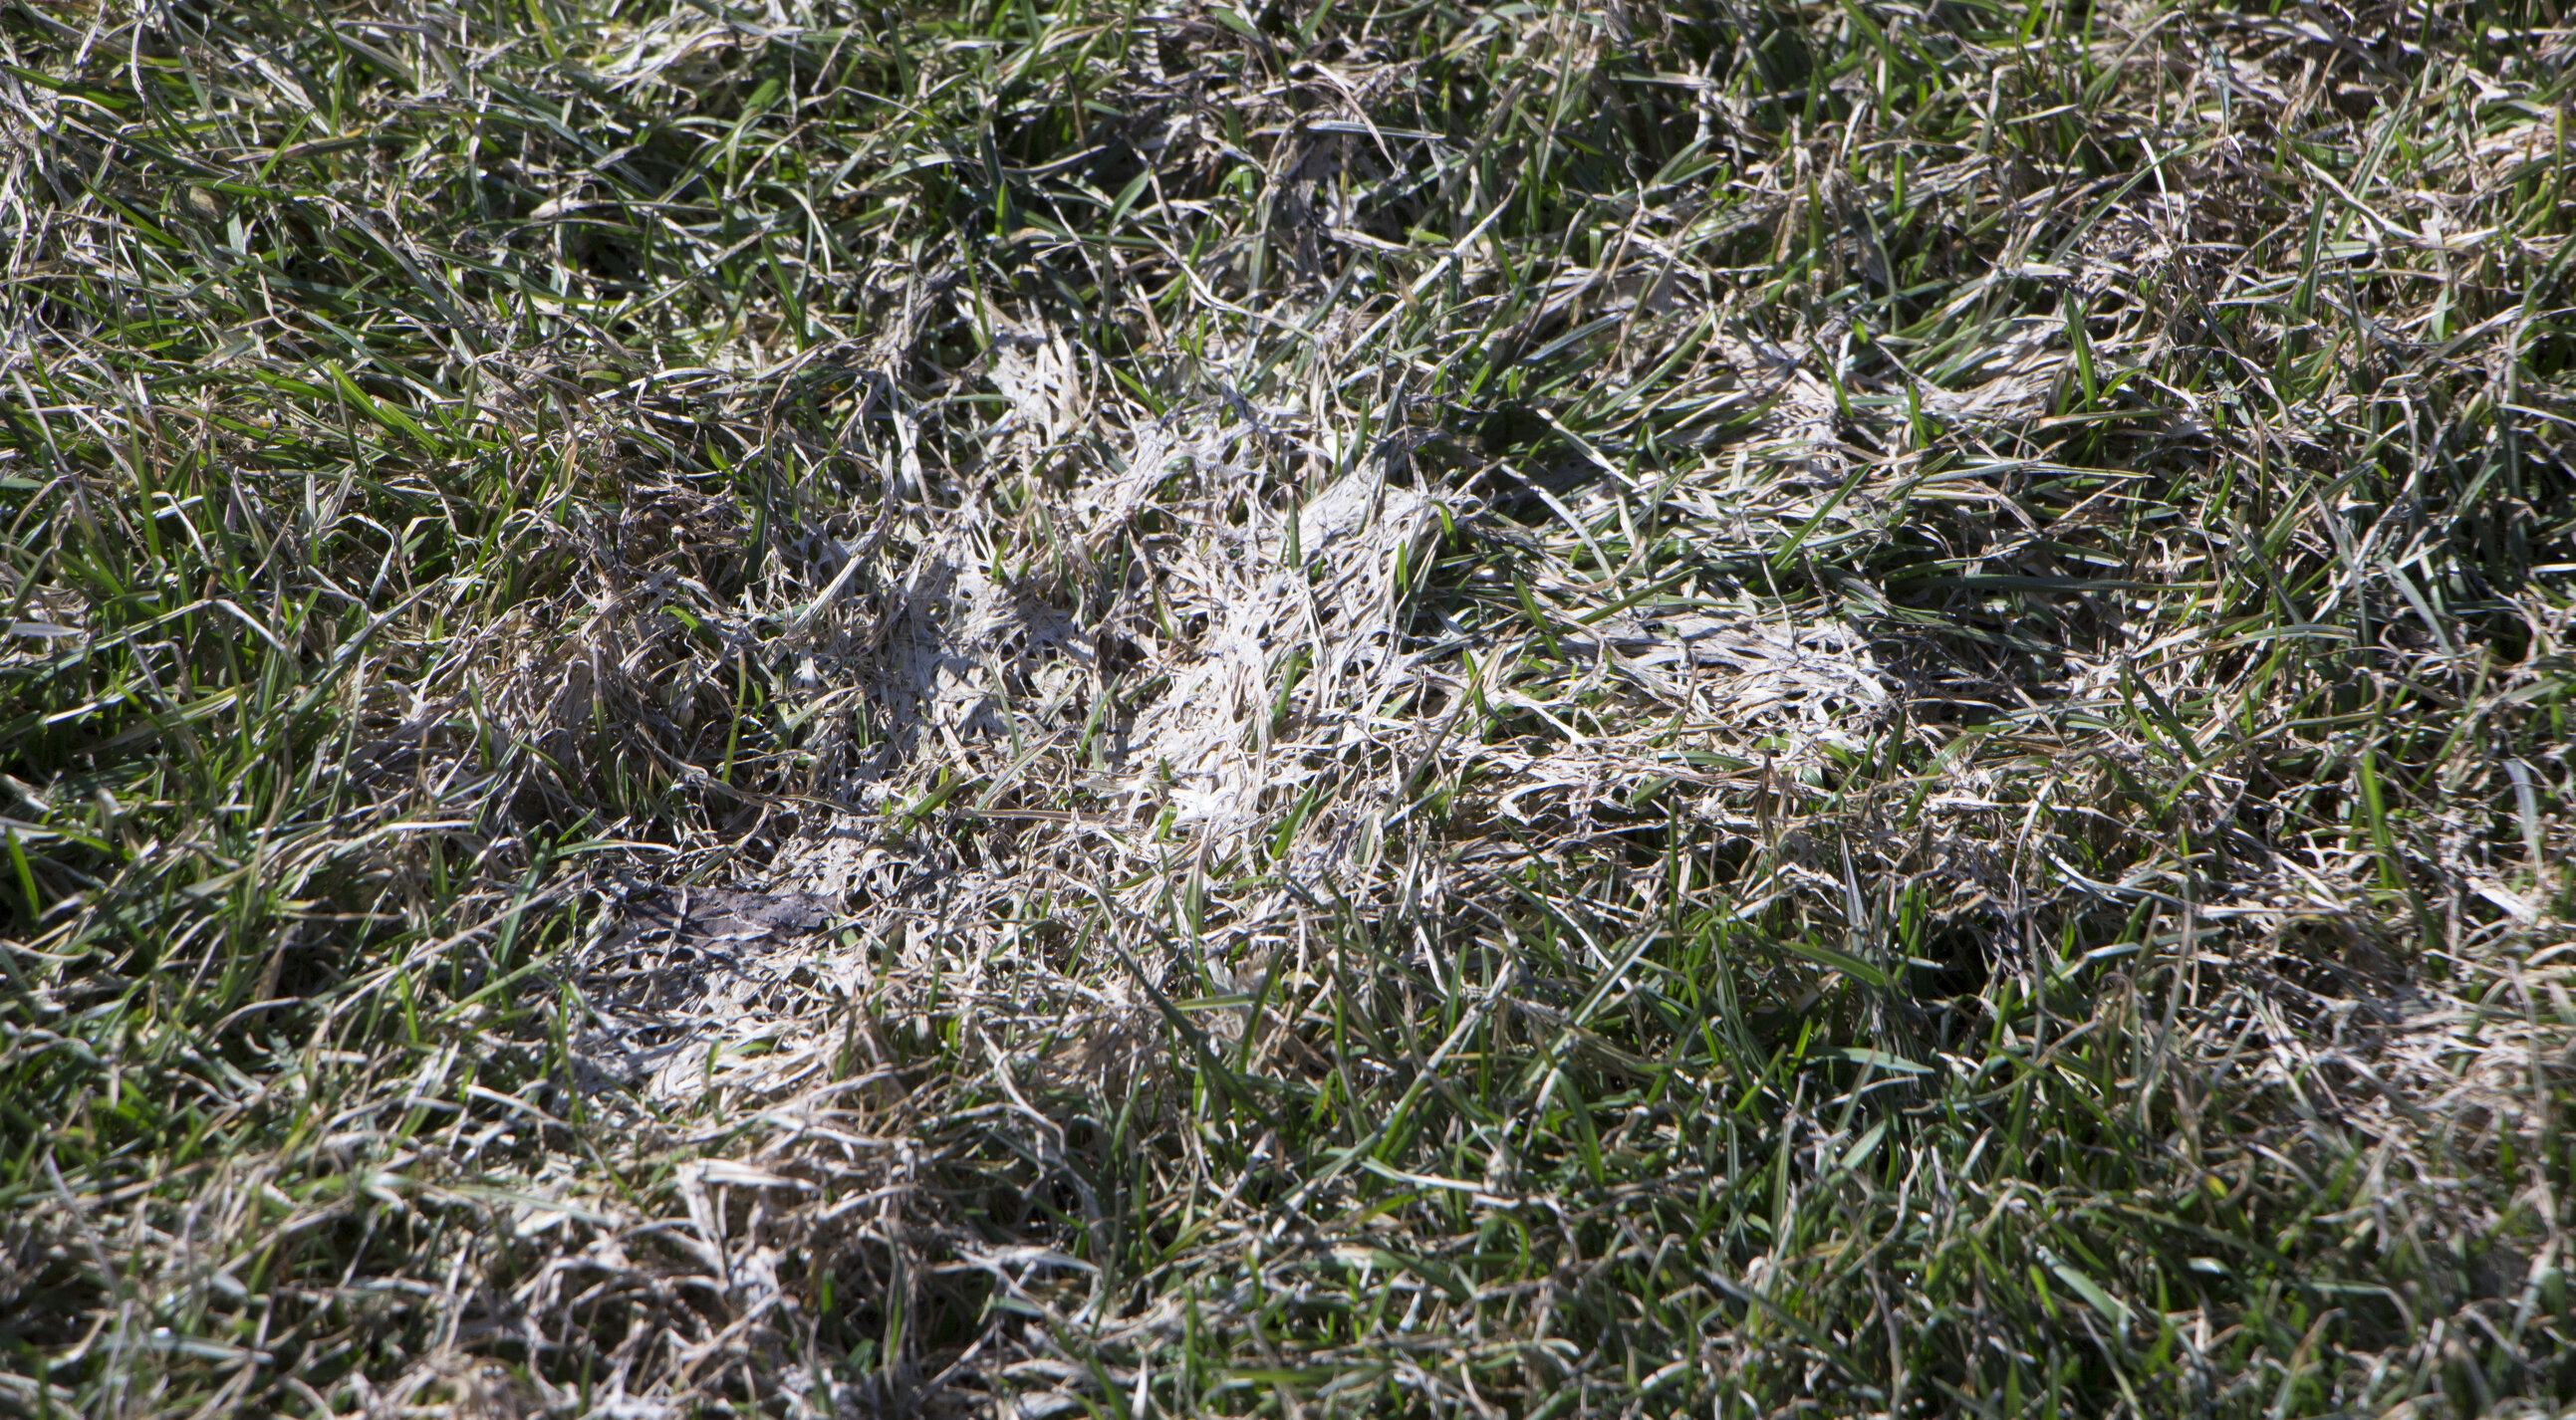 Grass affected by snow mold